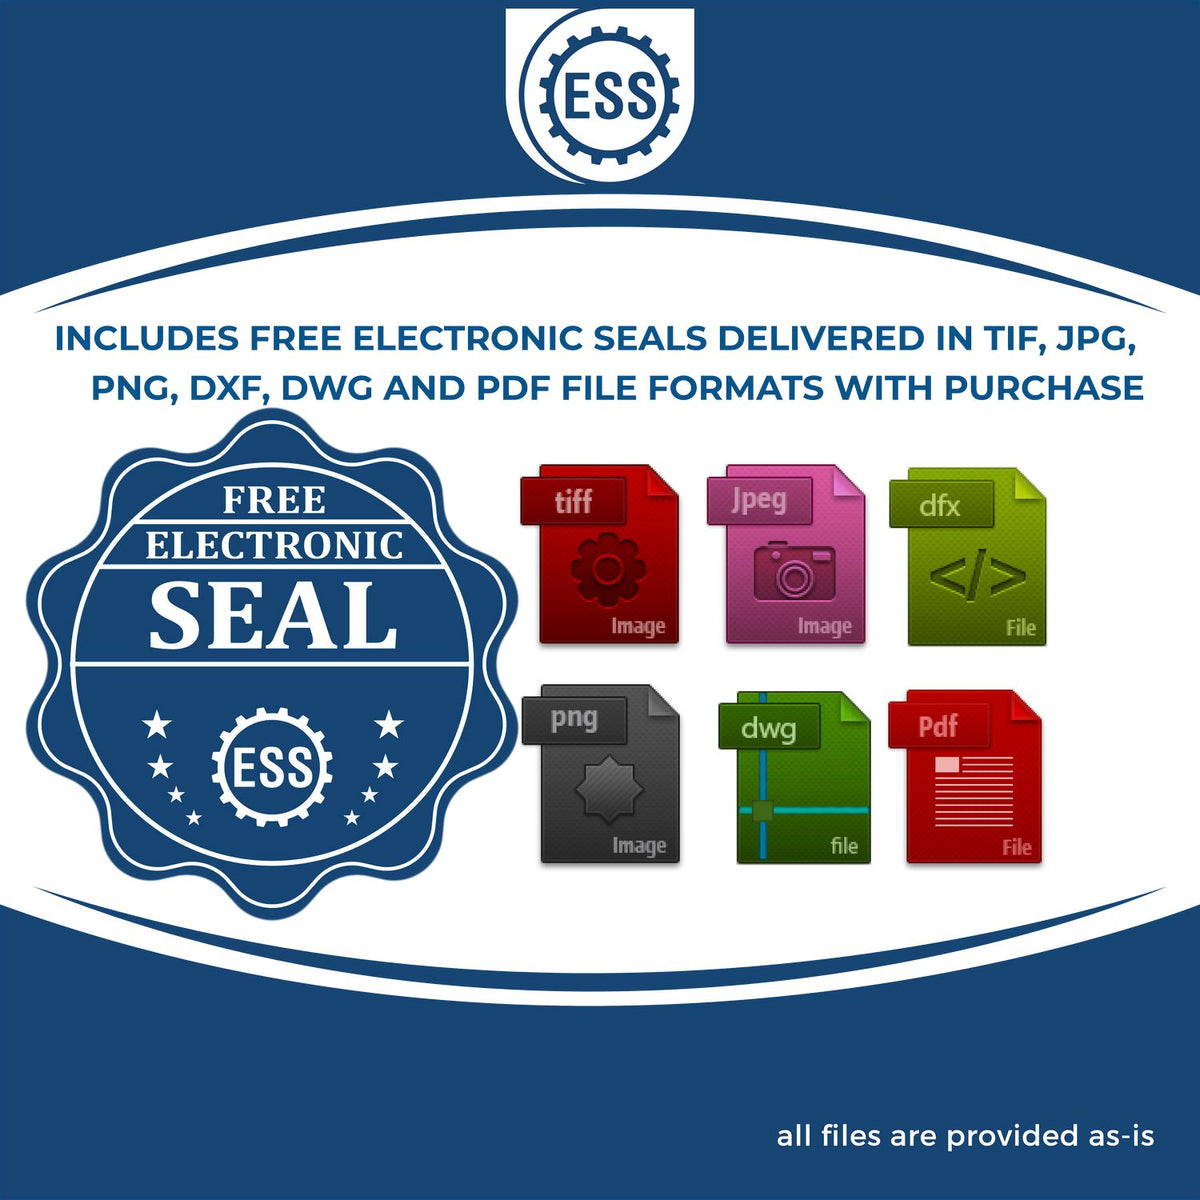 An infographic for the free electronic seal for the Wooden Handle Kansas State Seal Notary Public Stamp illustrating the different file type icons such as DXF, DWG, TIF, JPG and PNG.